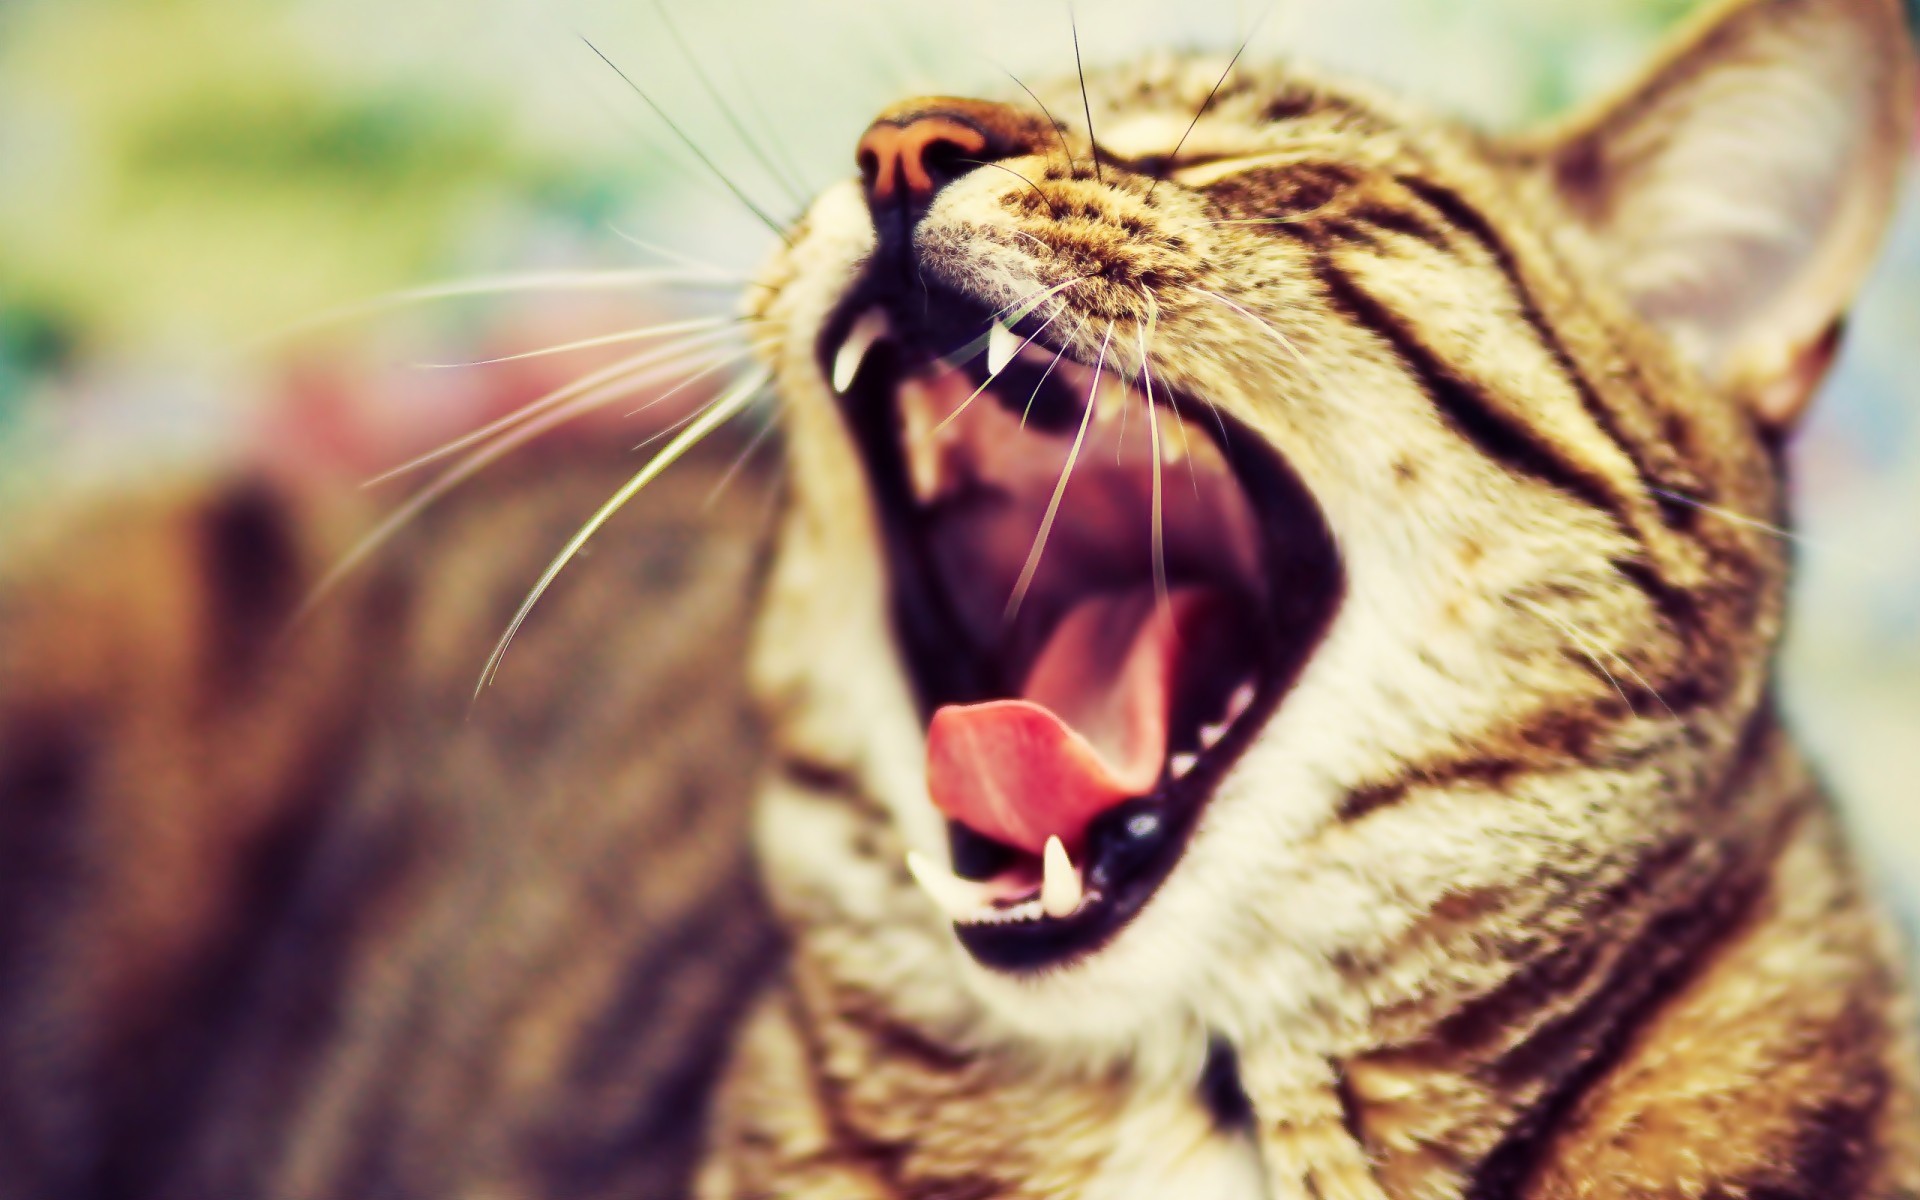 General 1920x1200 cats animals mammals closeup yawning open mouth pointed tooth whiskers fur blurry background blurred closed eyes